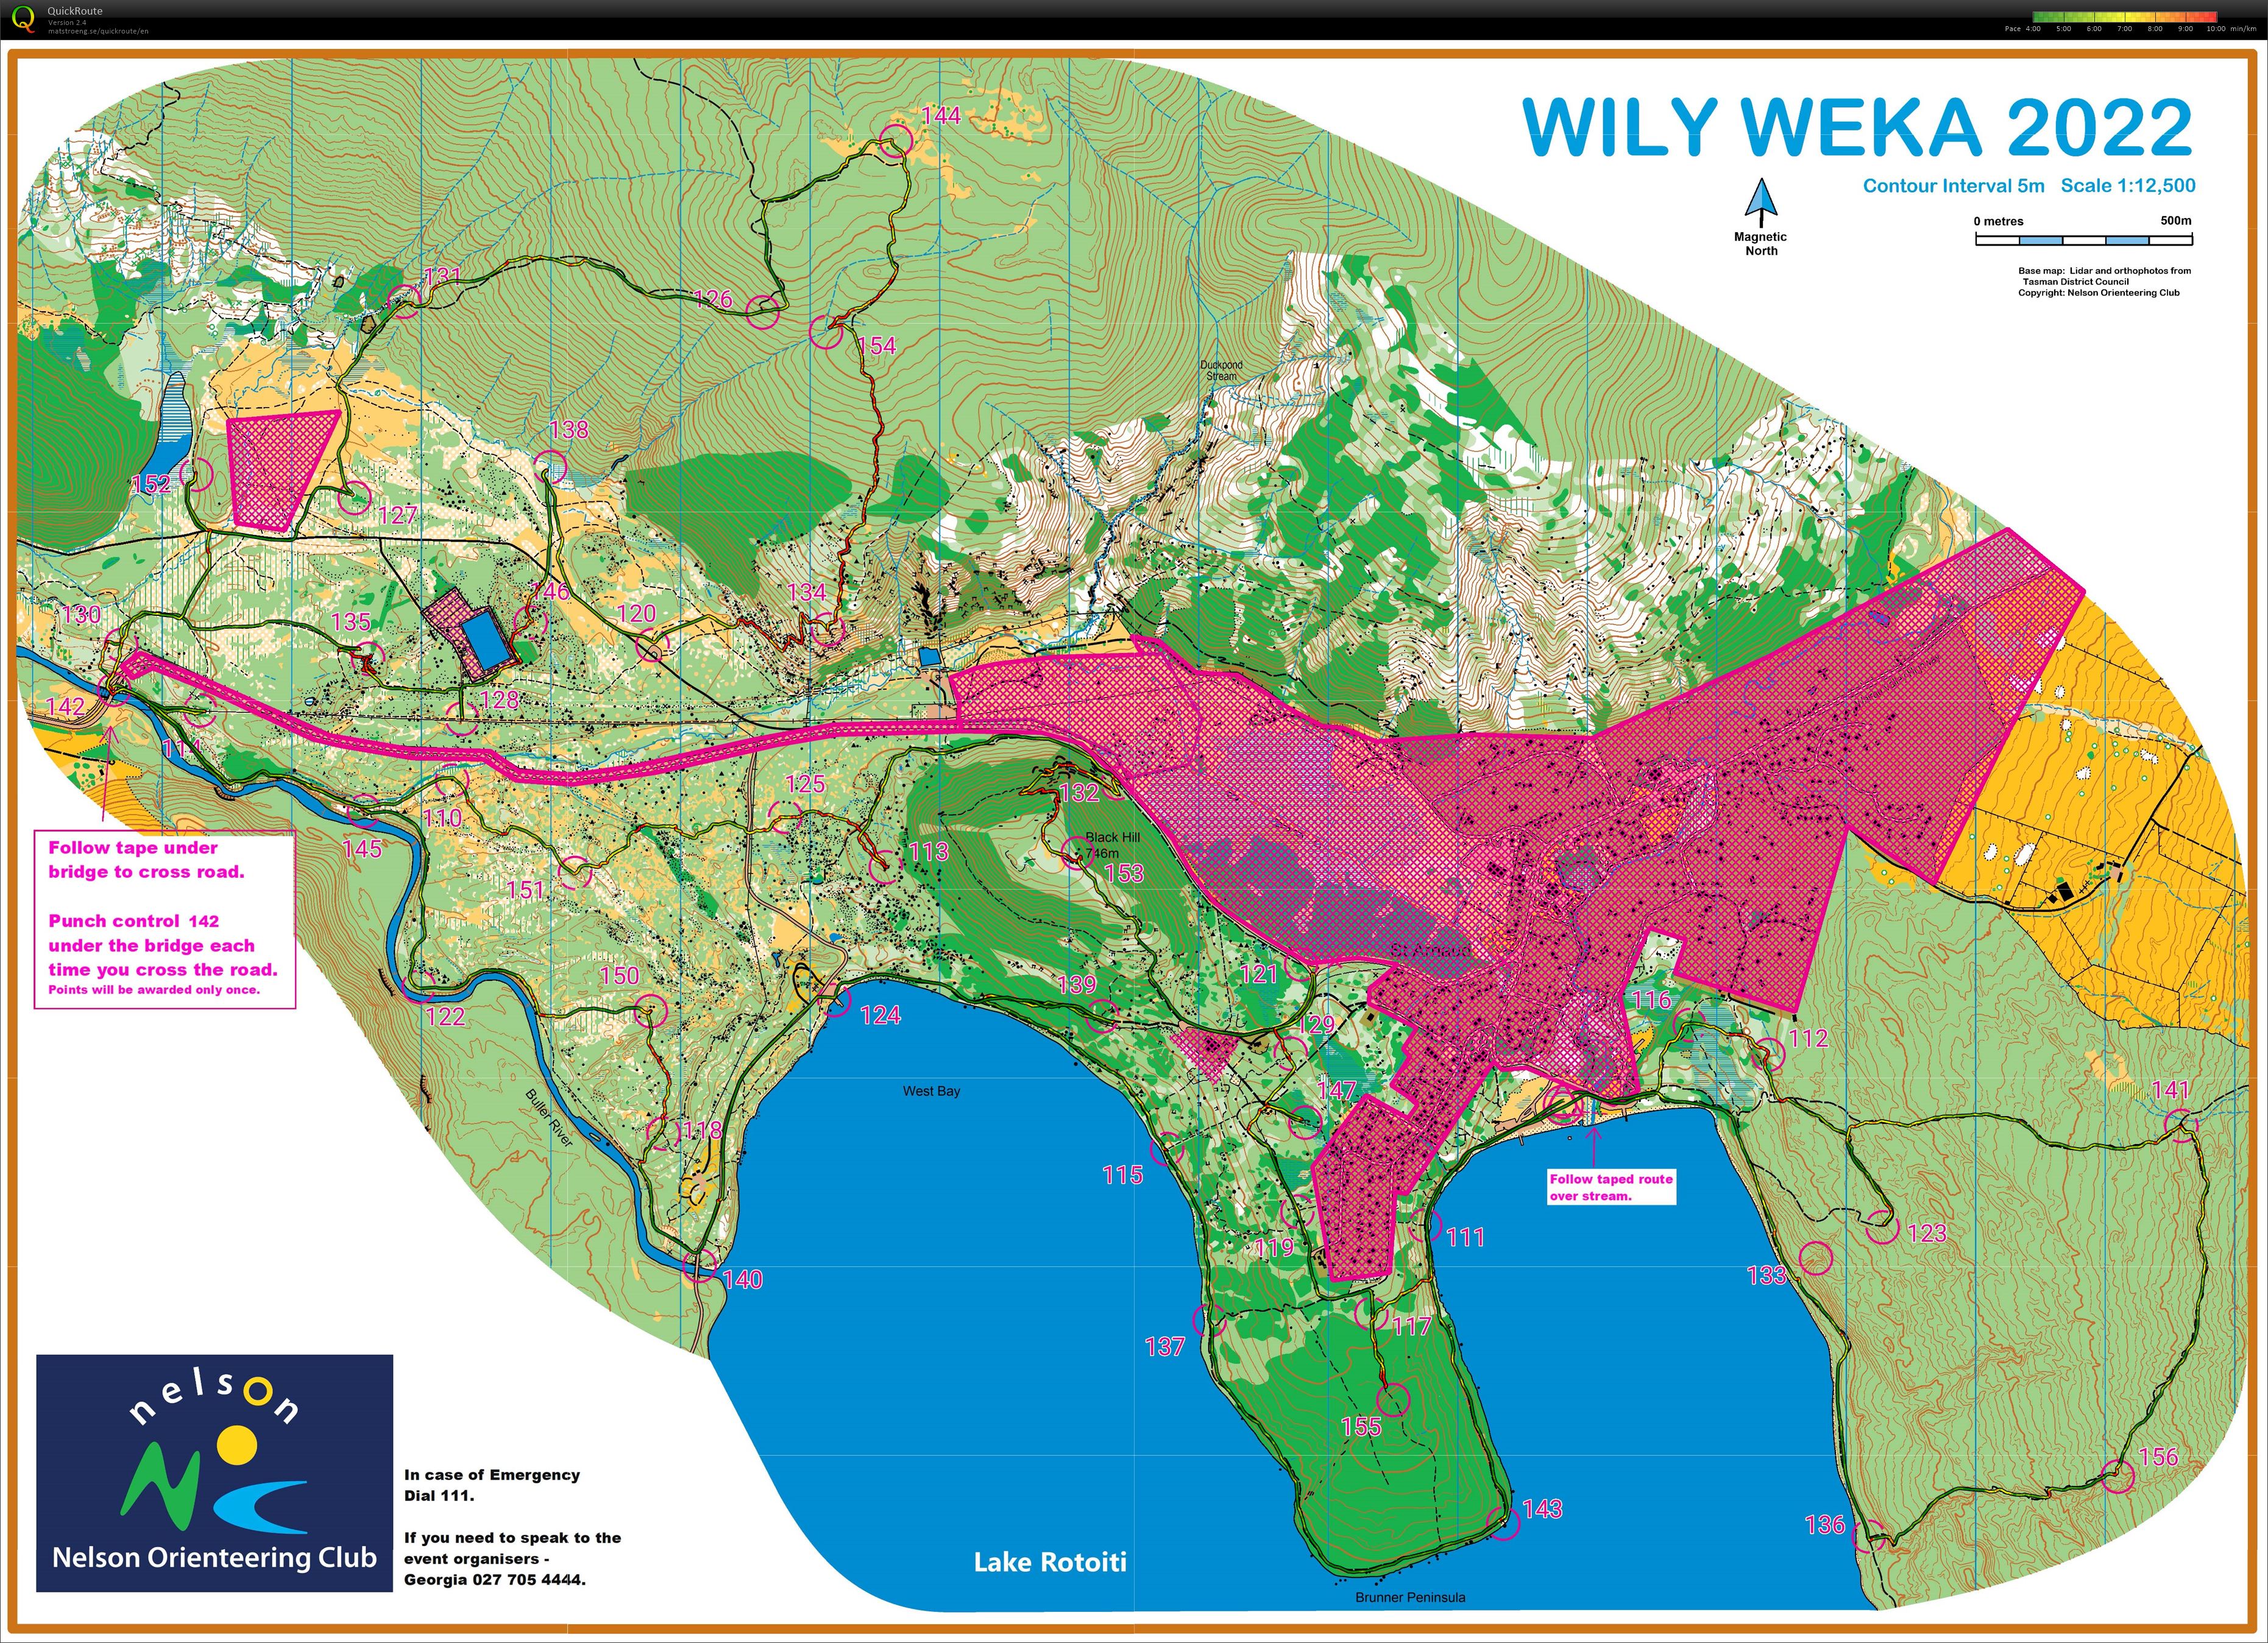 Wily Weka 2022 (10-09-2022)